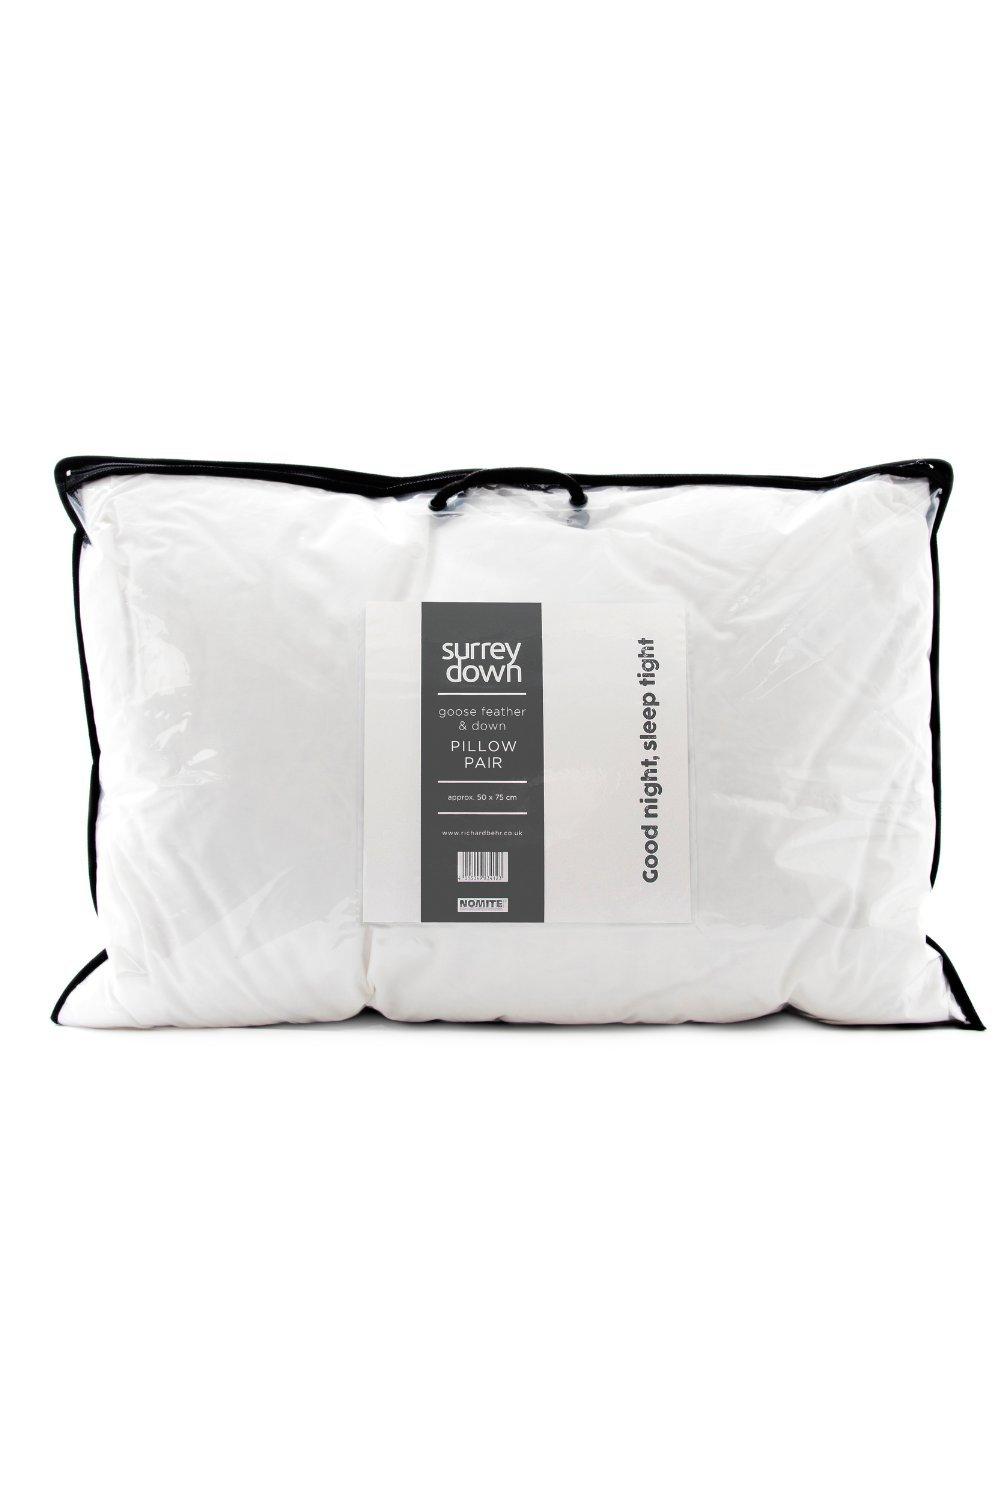 Goose Feather & Down Soft Pillow (2 Pack)